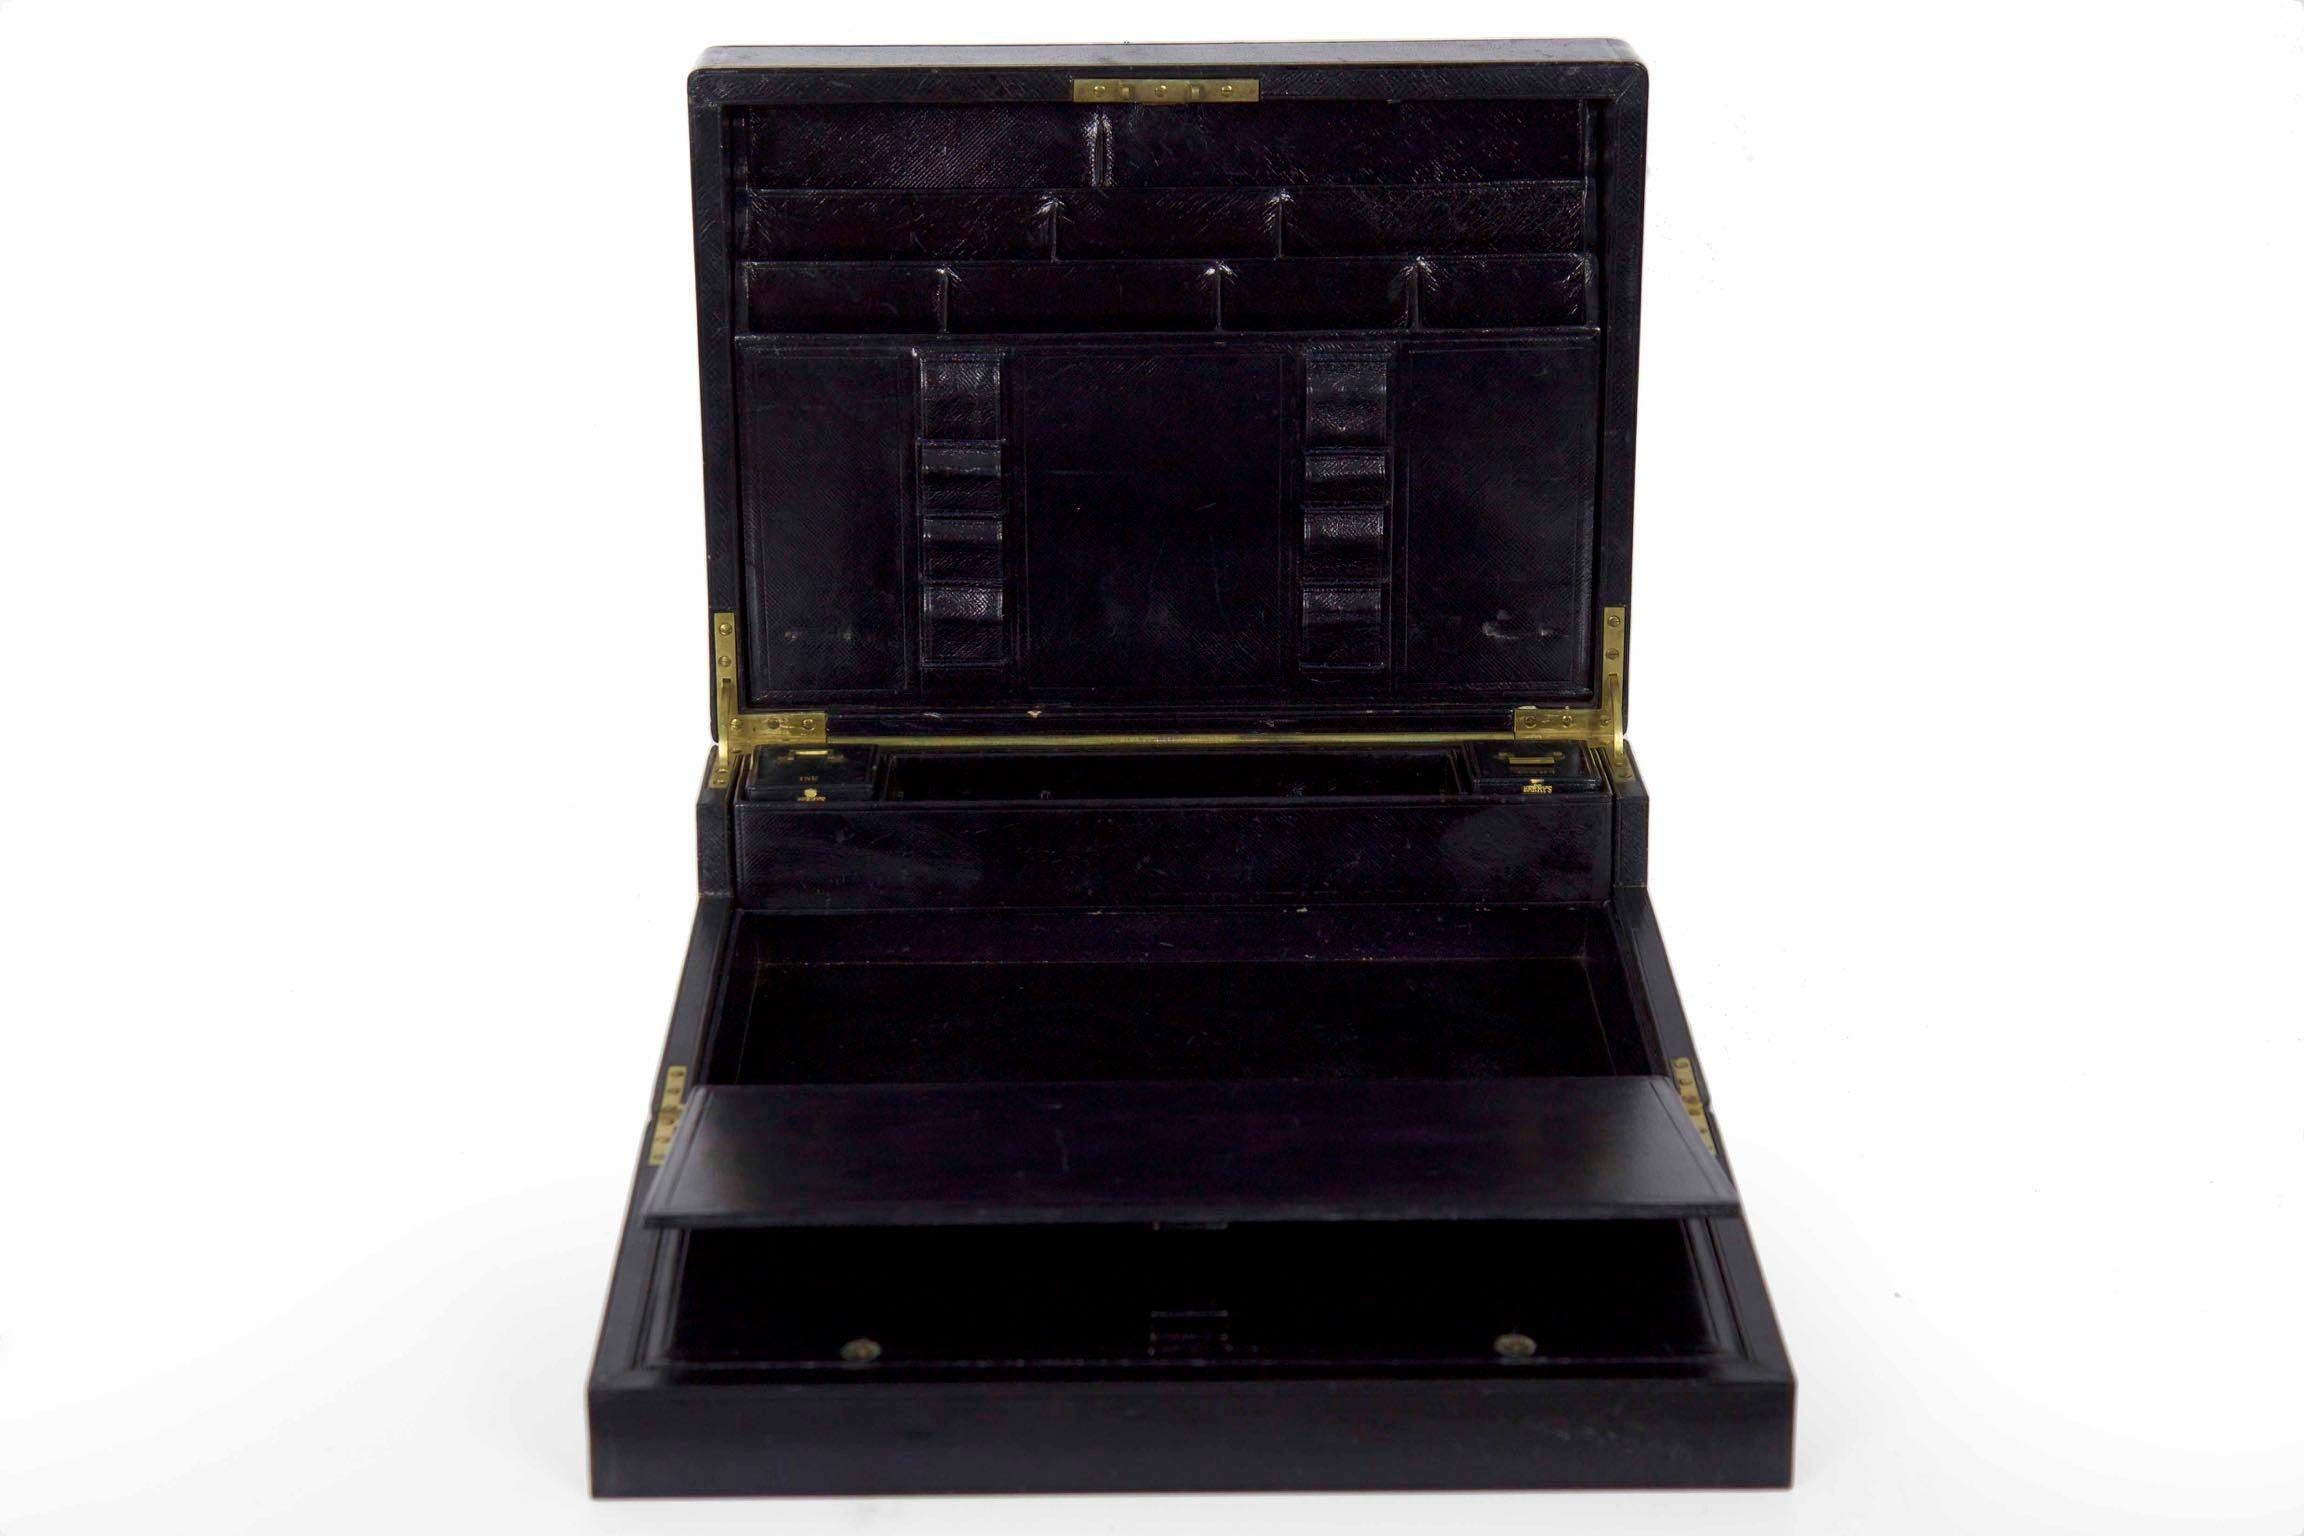 A VERY FINE LEATHER BOUND STATIONARY WRITING BOX
Lock inscribed Bramah, London, inkwell inscribed Berry’s Patent, plate inscribed MARC, March 25 1872
Item # 806PHI26

An unusually fine writing box from the third quarter of the 19th century, this